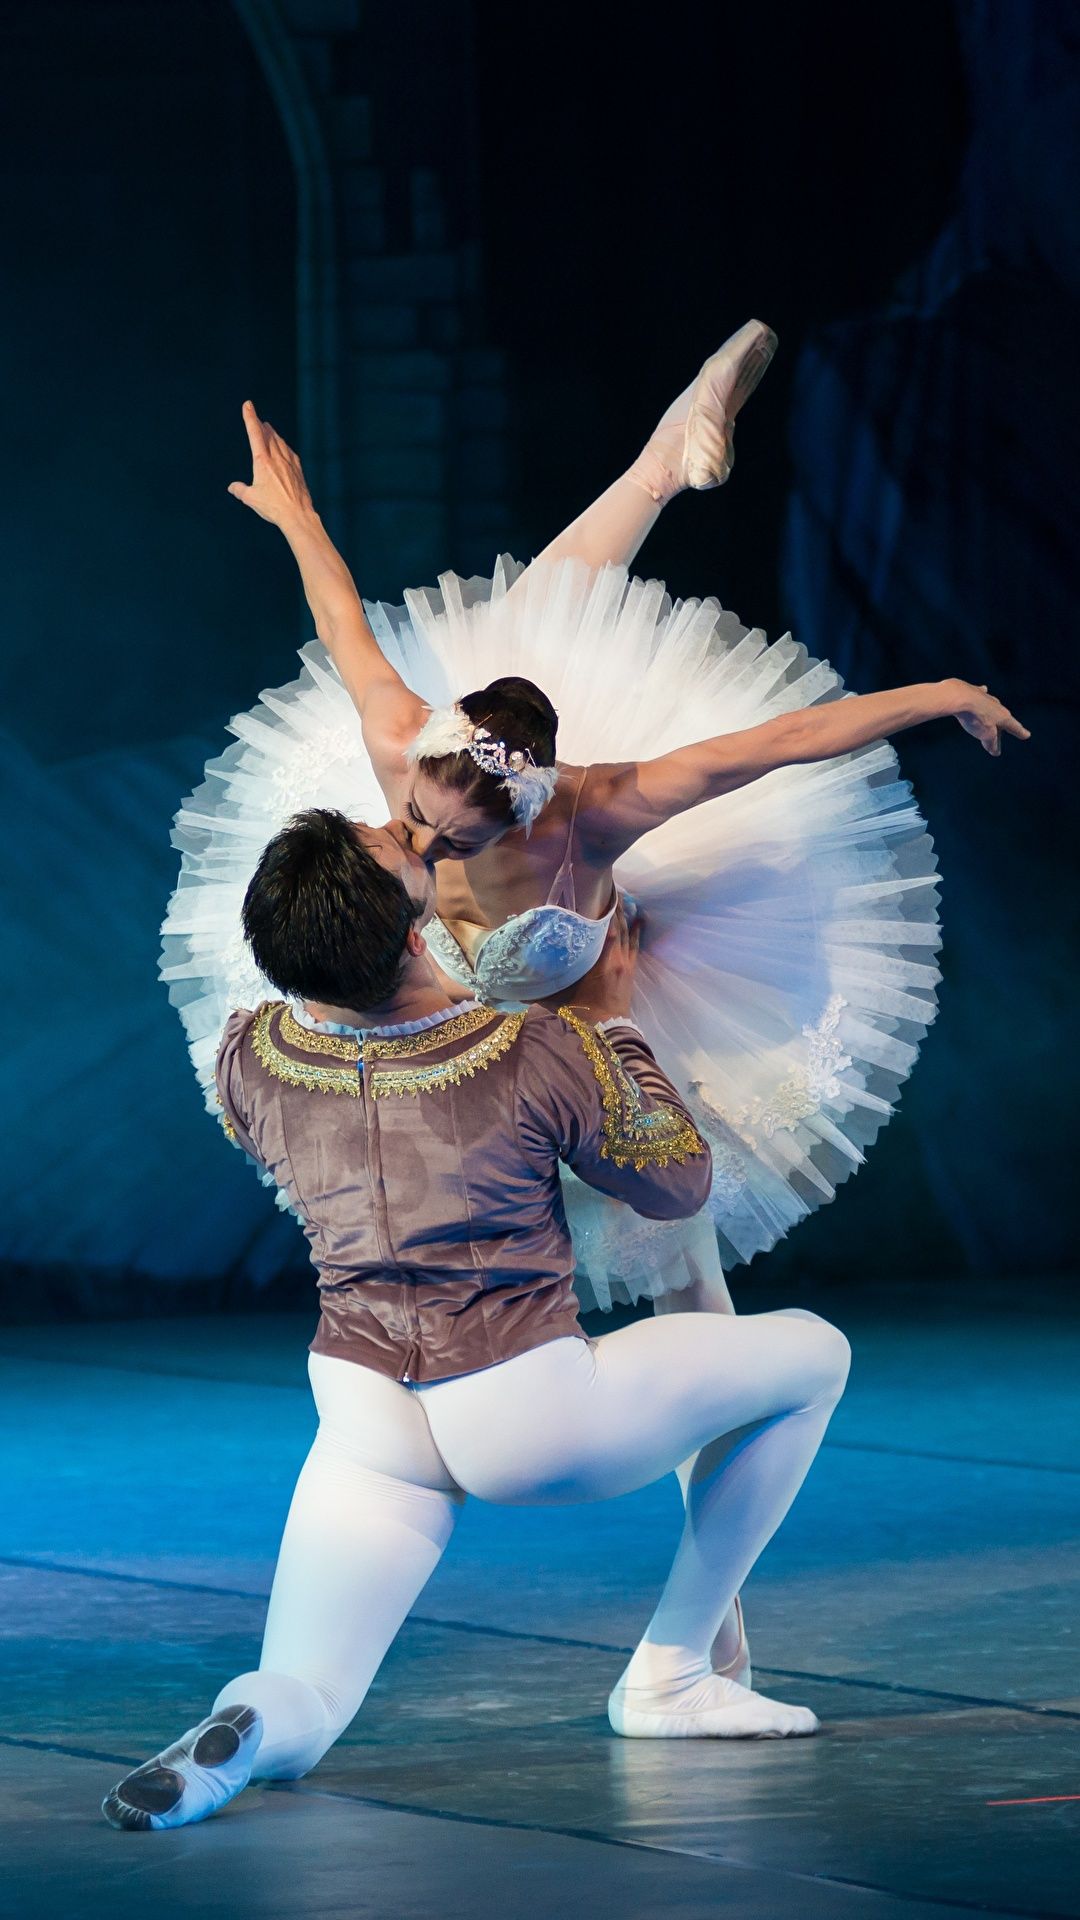 A male and female ballet dancer on stage, the female is in a卿吻姿势 with her arms and legs extended, the male is in a kneeling position facing the female - Ballet